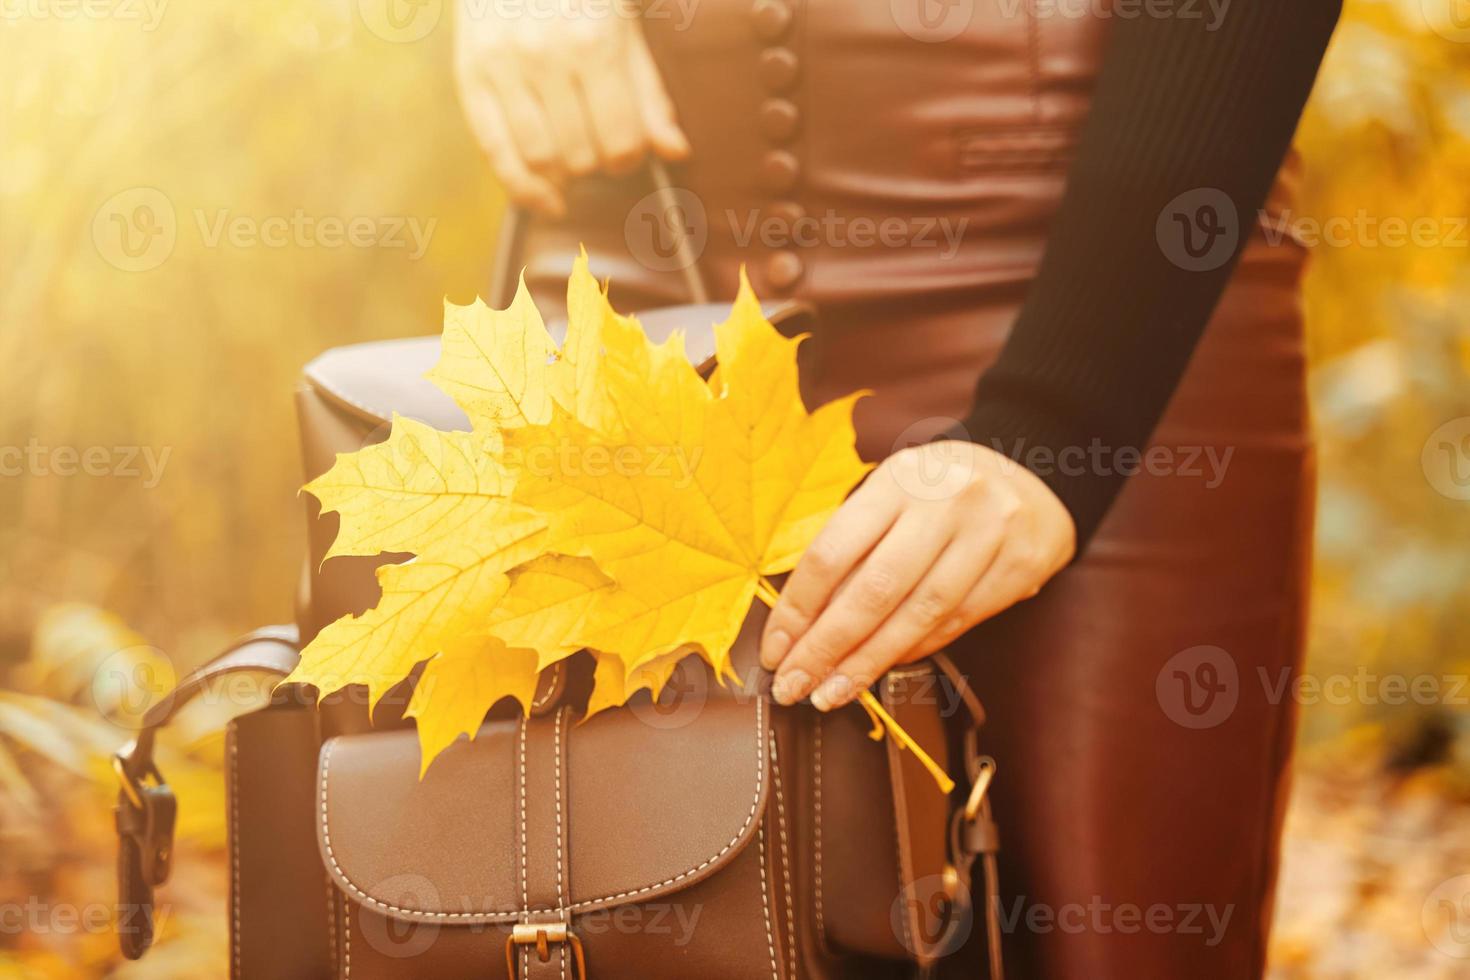 Woman with a backpack and foliage. photo